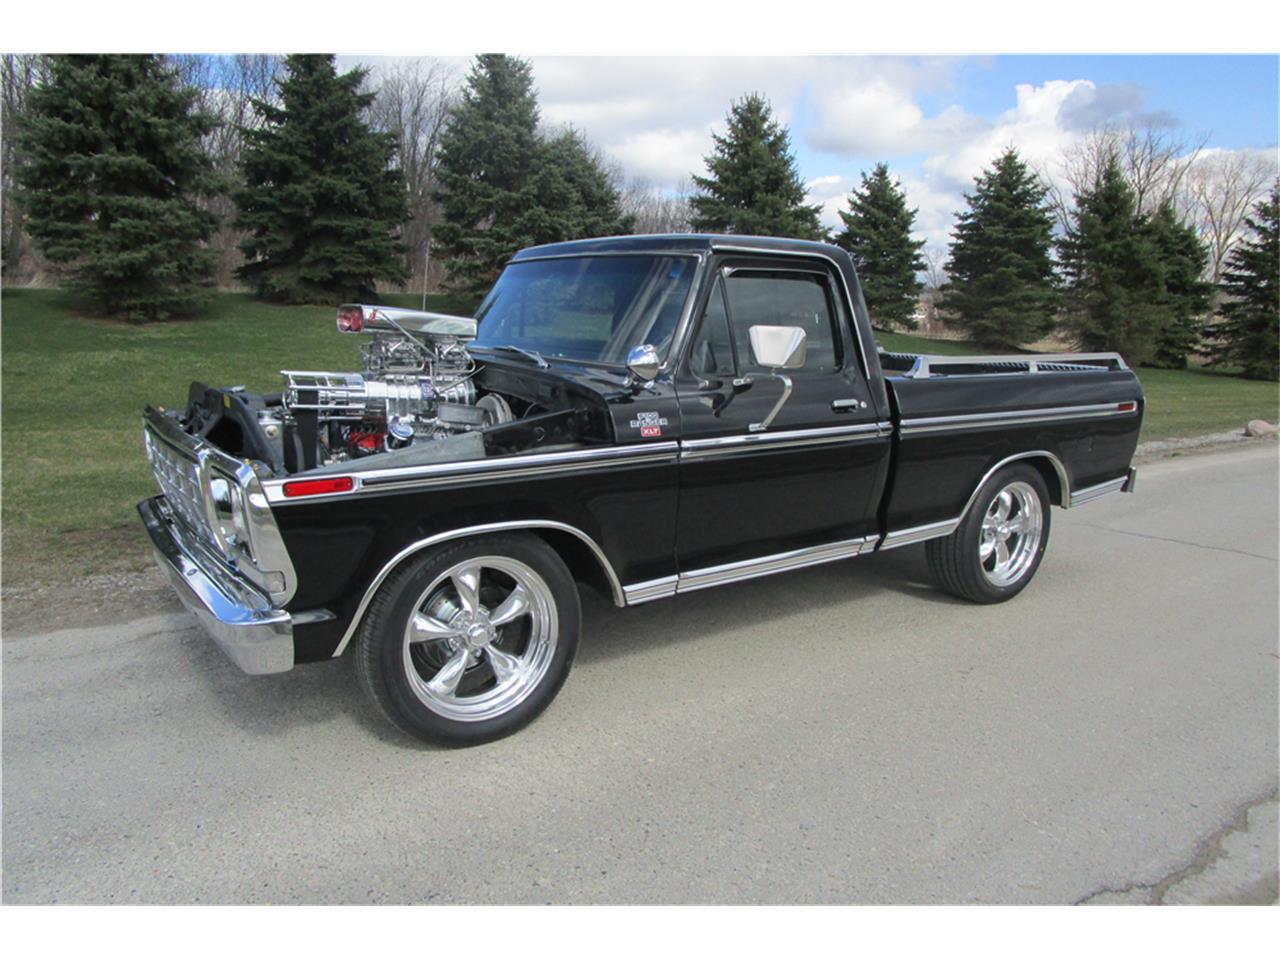 1979 ford f100 for sale classiccars com cc 932142 1979 ford f100 for sale classiccars